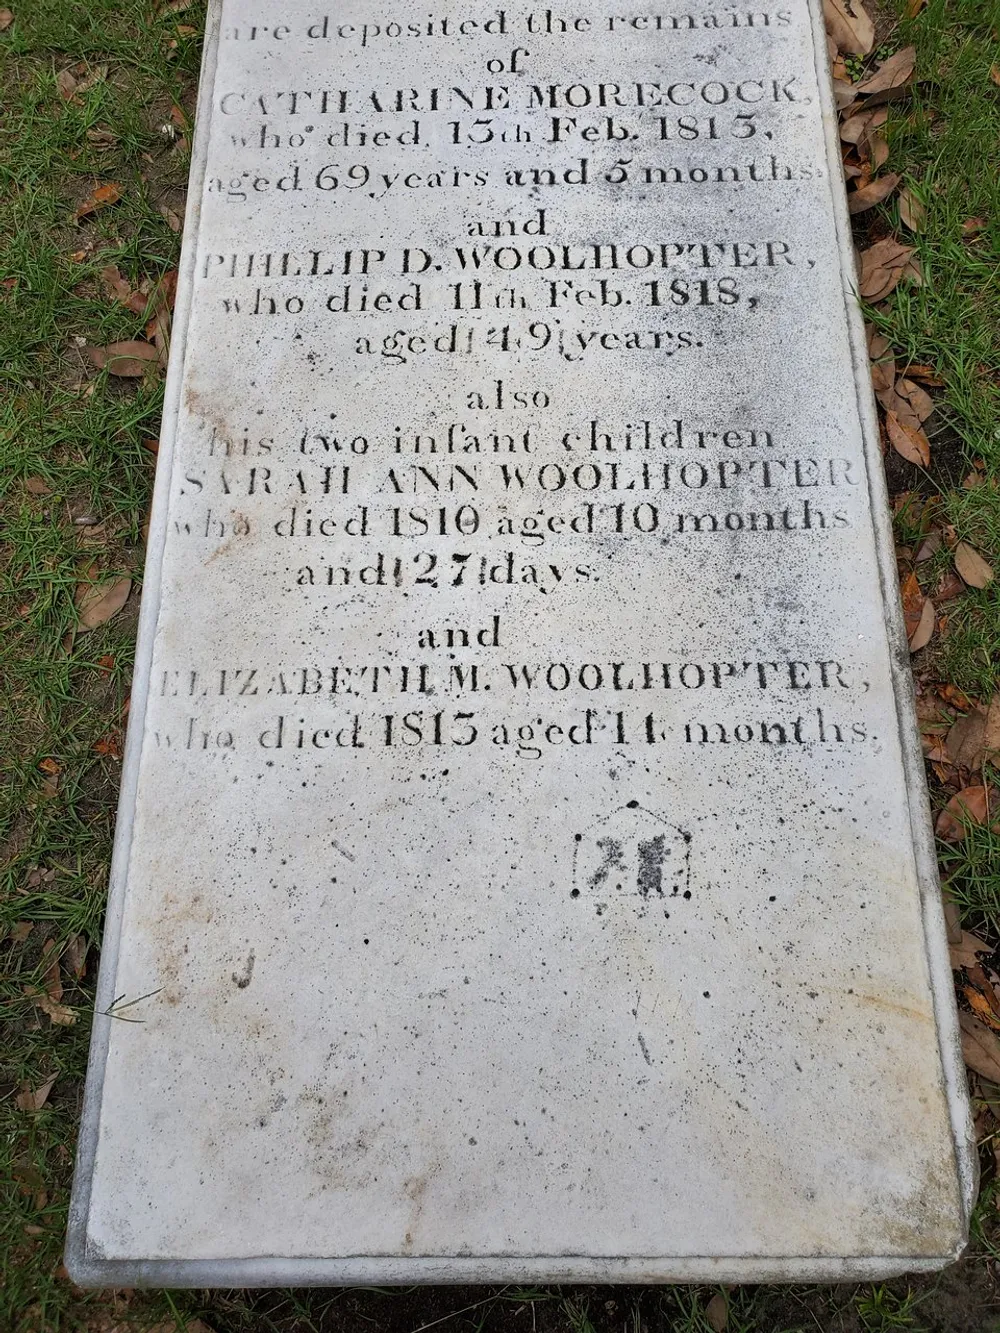 The image shows an old gravestone lying flat on the ground with inscriptions marking the resting places of Catharine Morecock Philip D Woolhopter and their two infant children dating back to the early 19th century